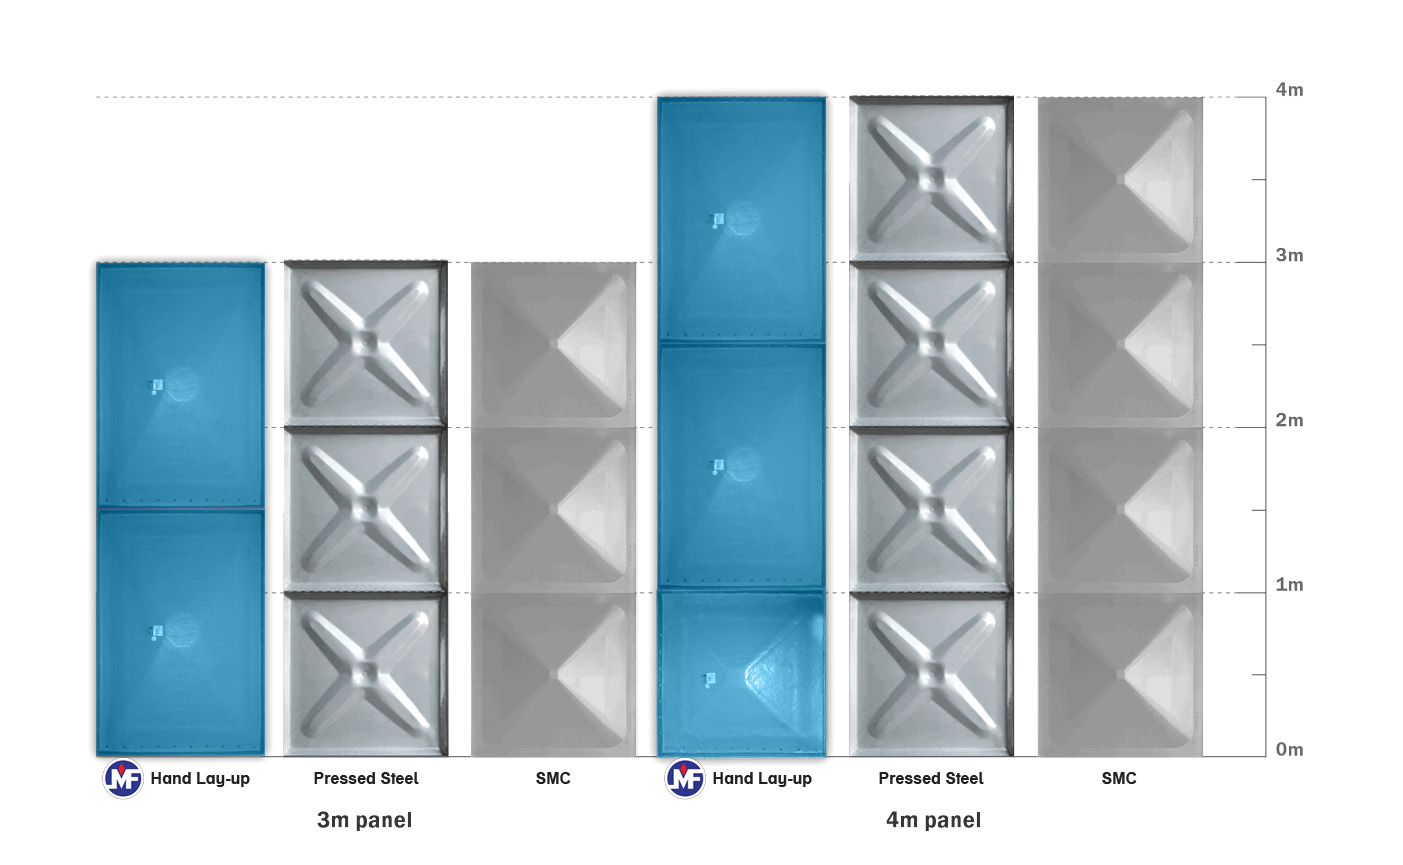 Panel Tanks Comparison 3m and 4m, Number of Joints, FRP Hand Lay-up vs SMC vs Pressed Steel Panel Tanks